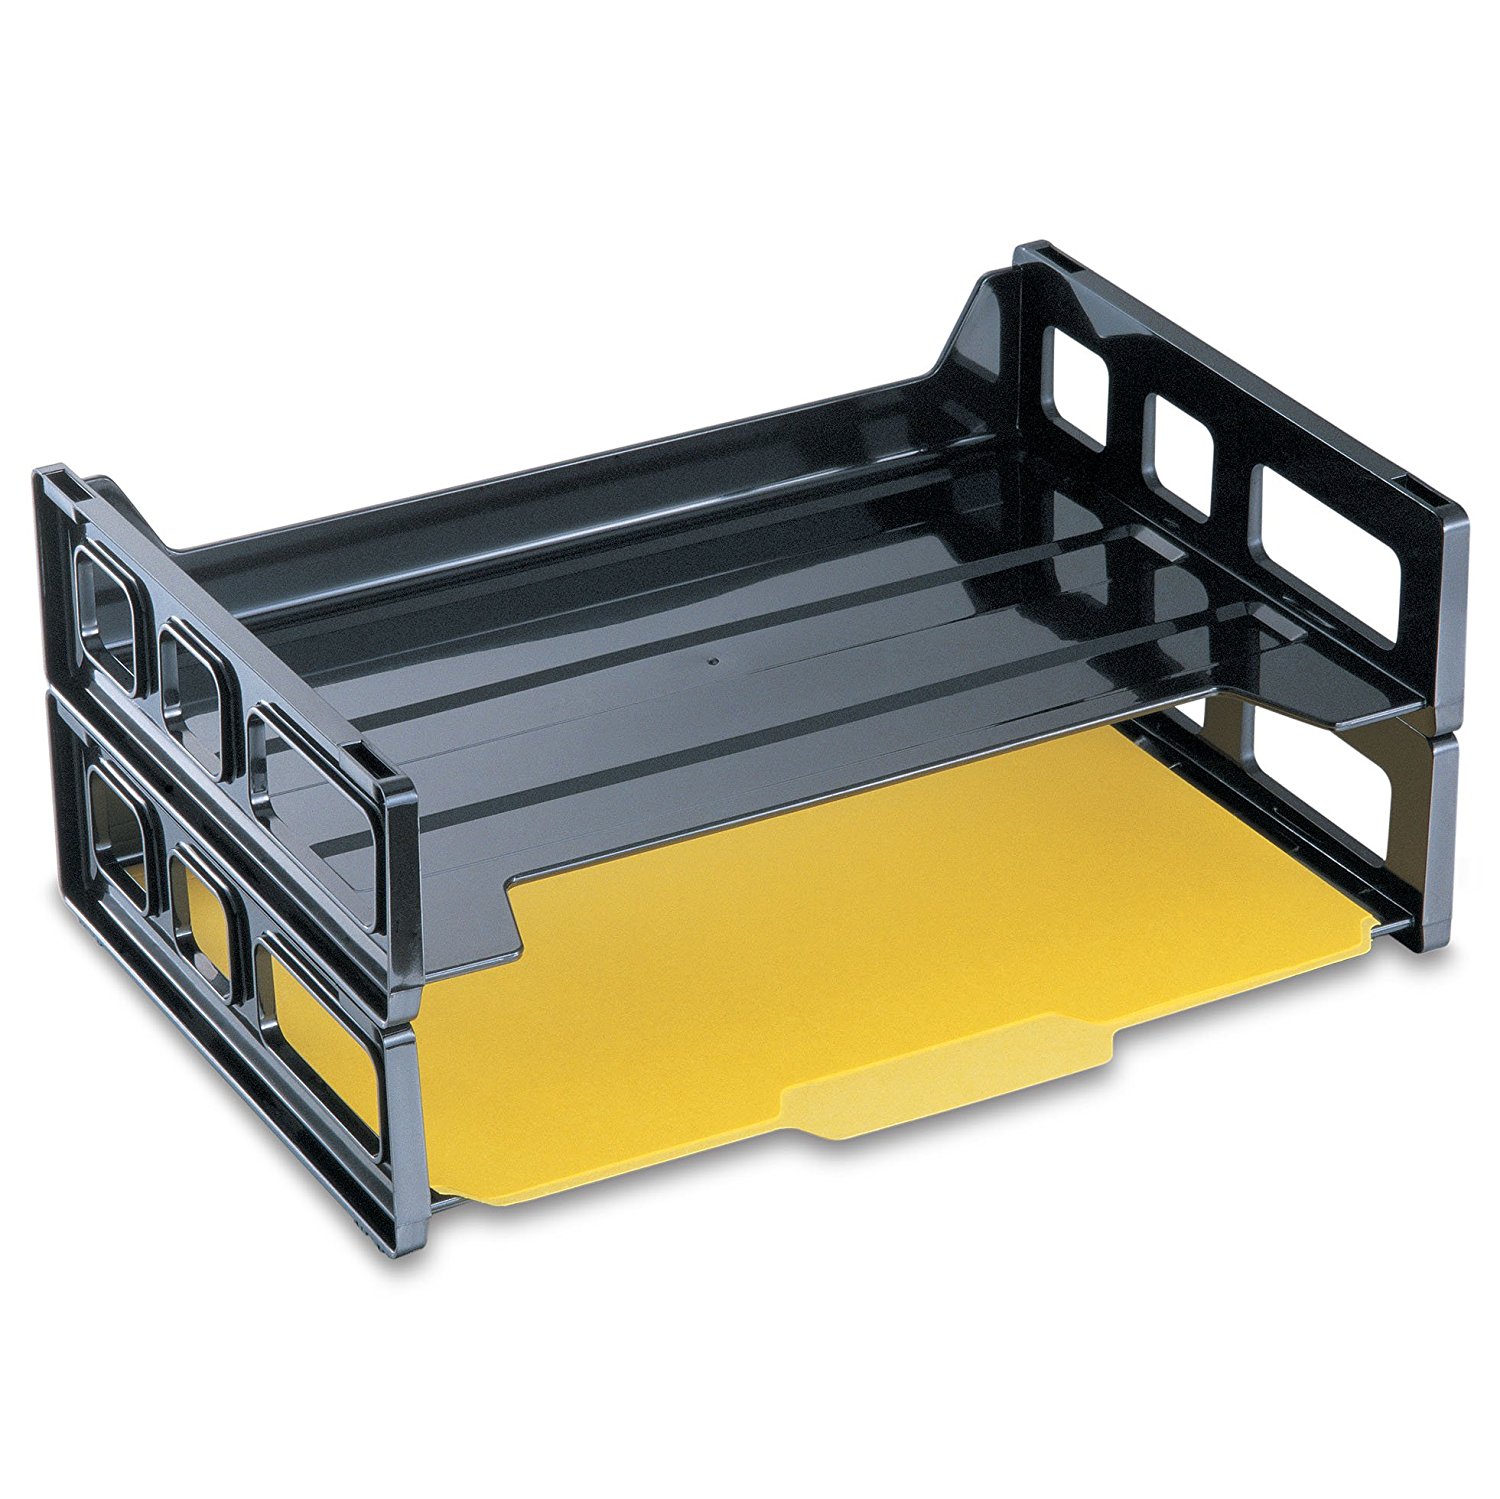 Will stack with most brands of side loading letter trays